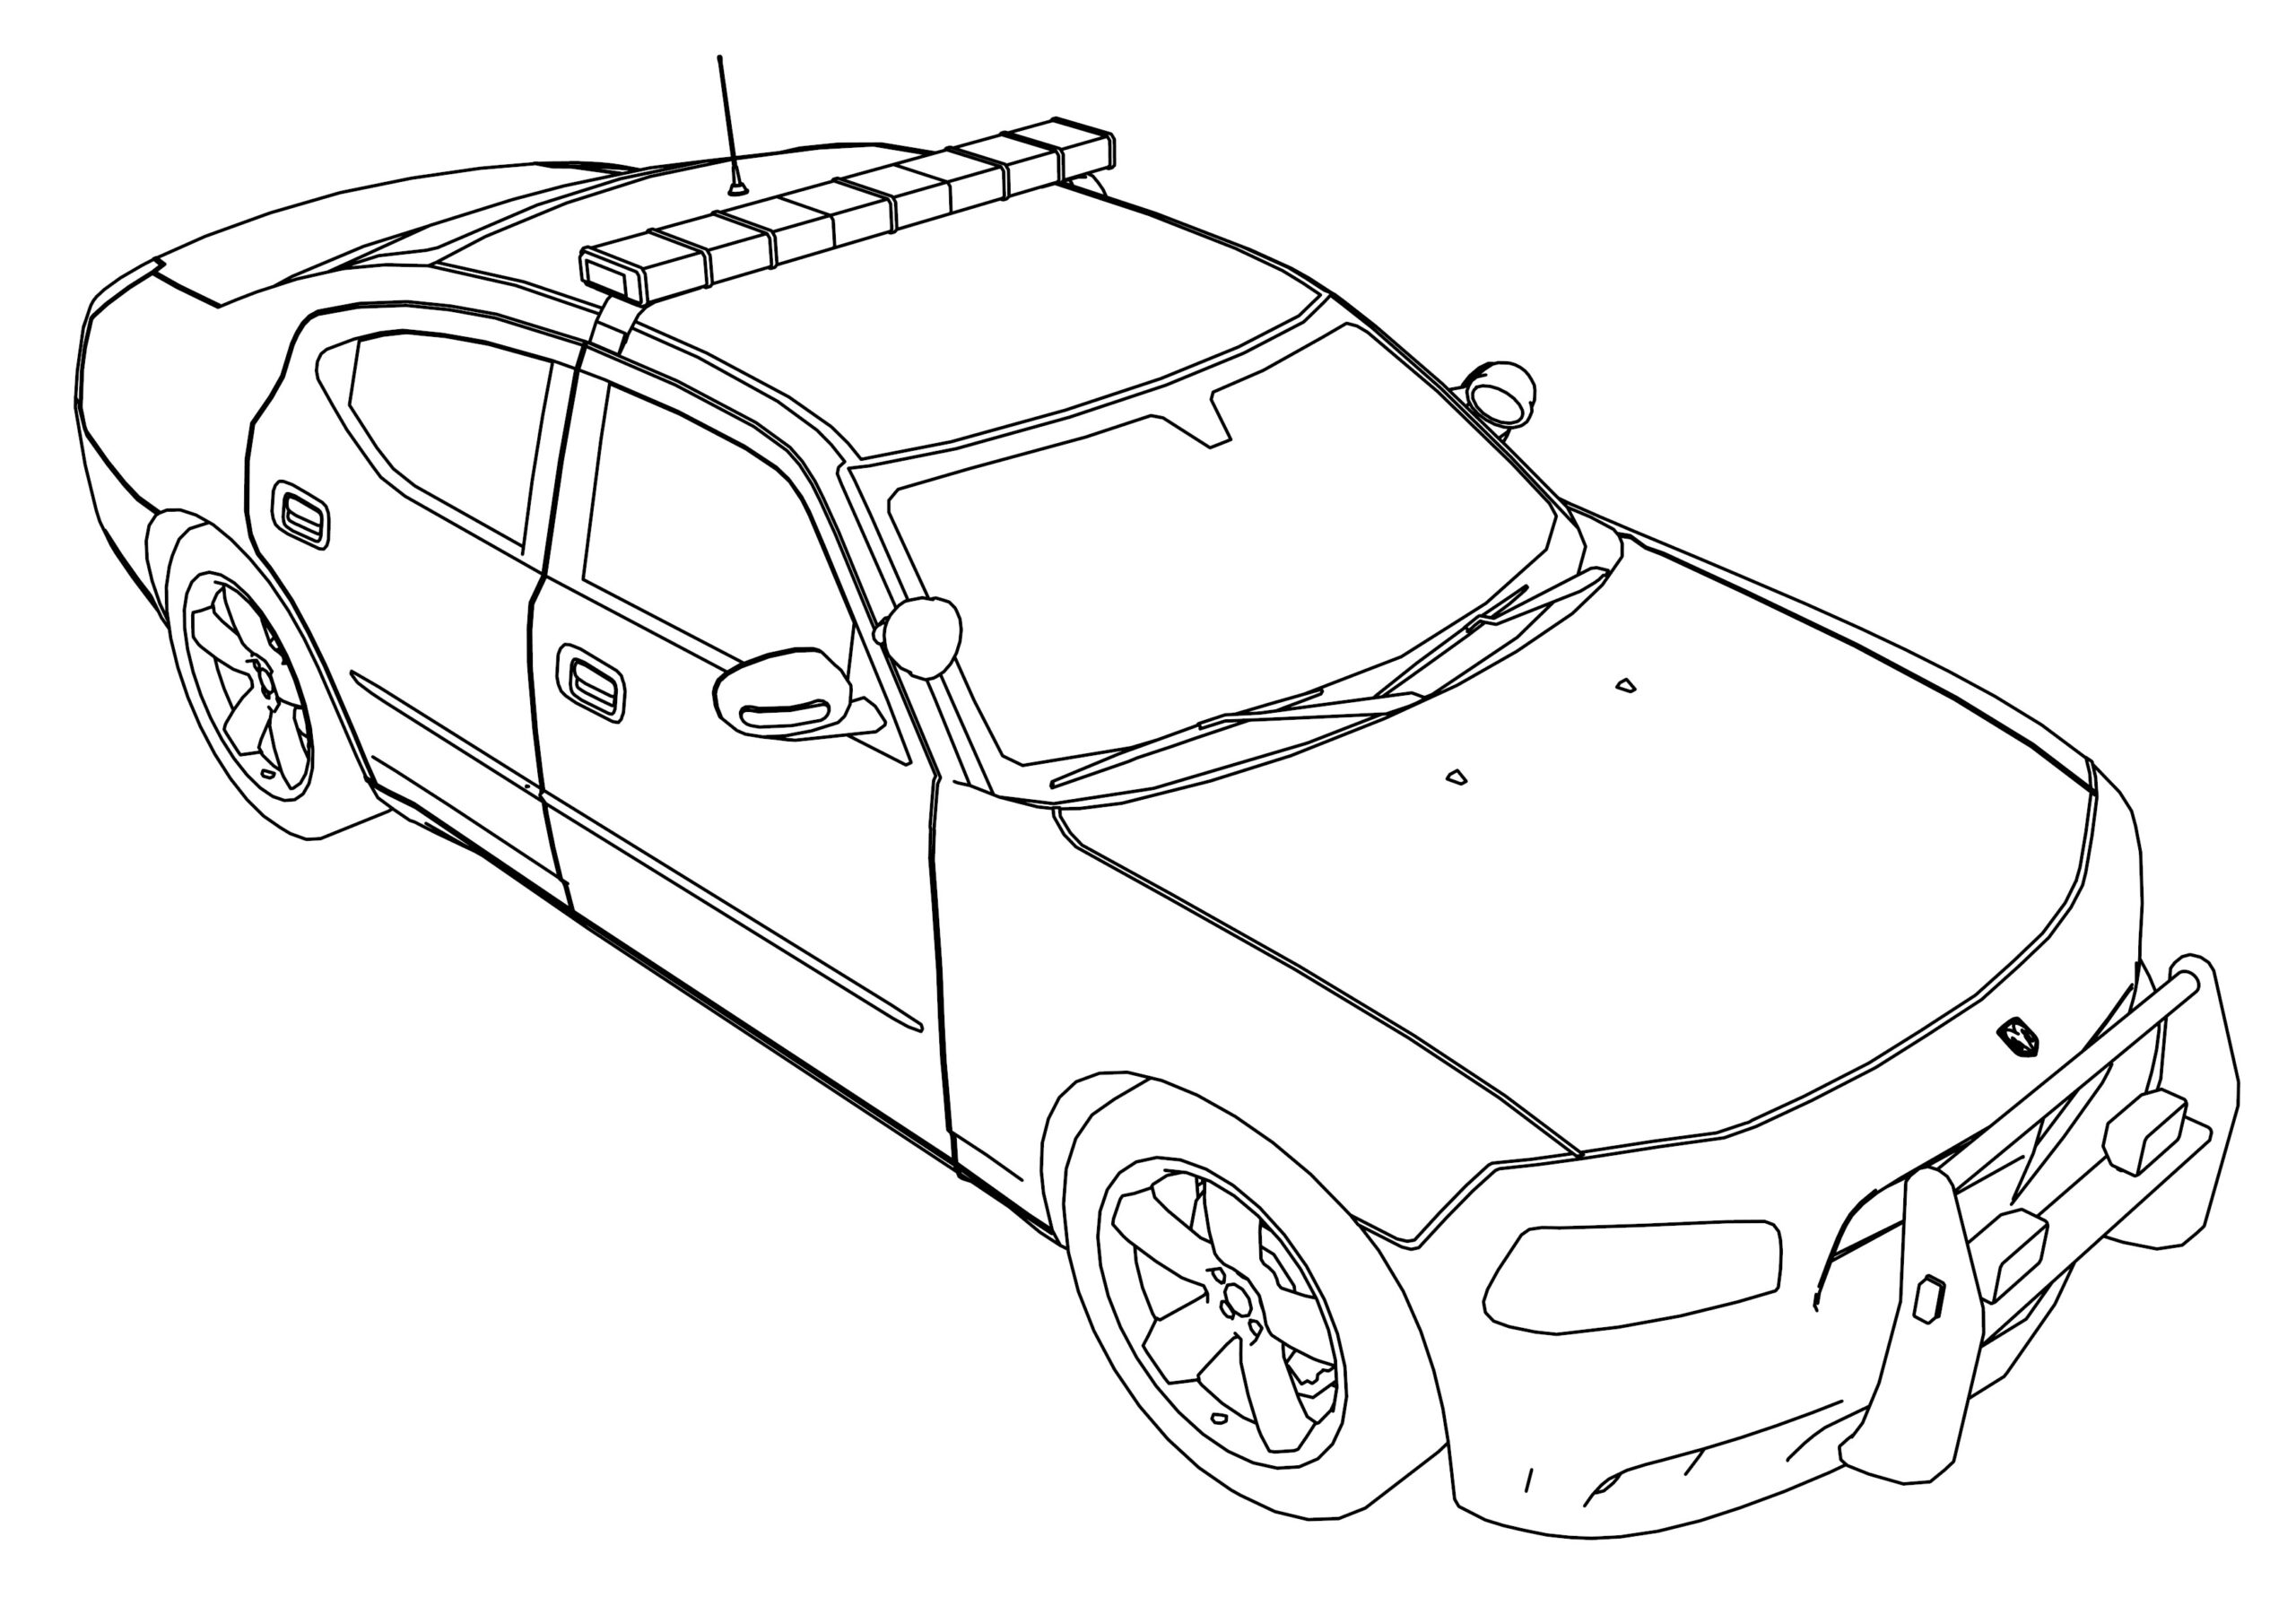 coloring pages police car coloring pages police car sevencoloringpages